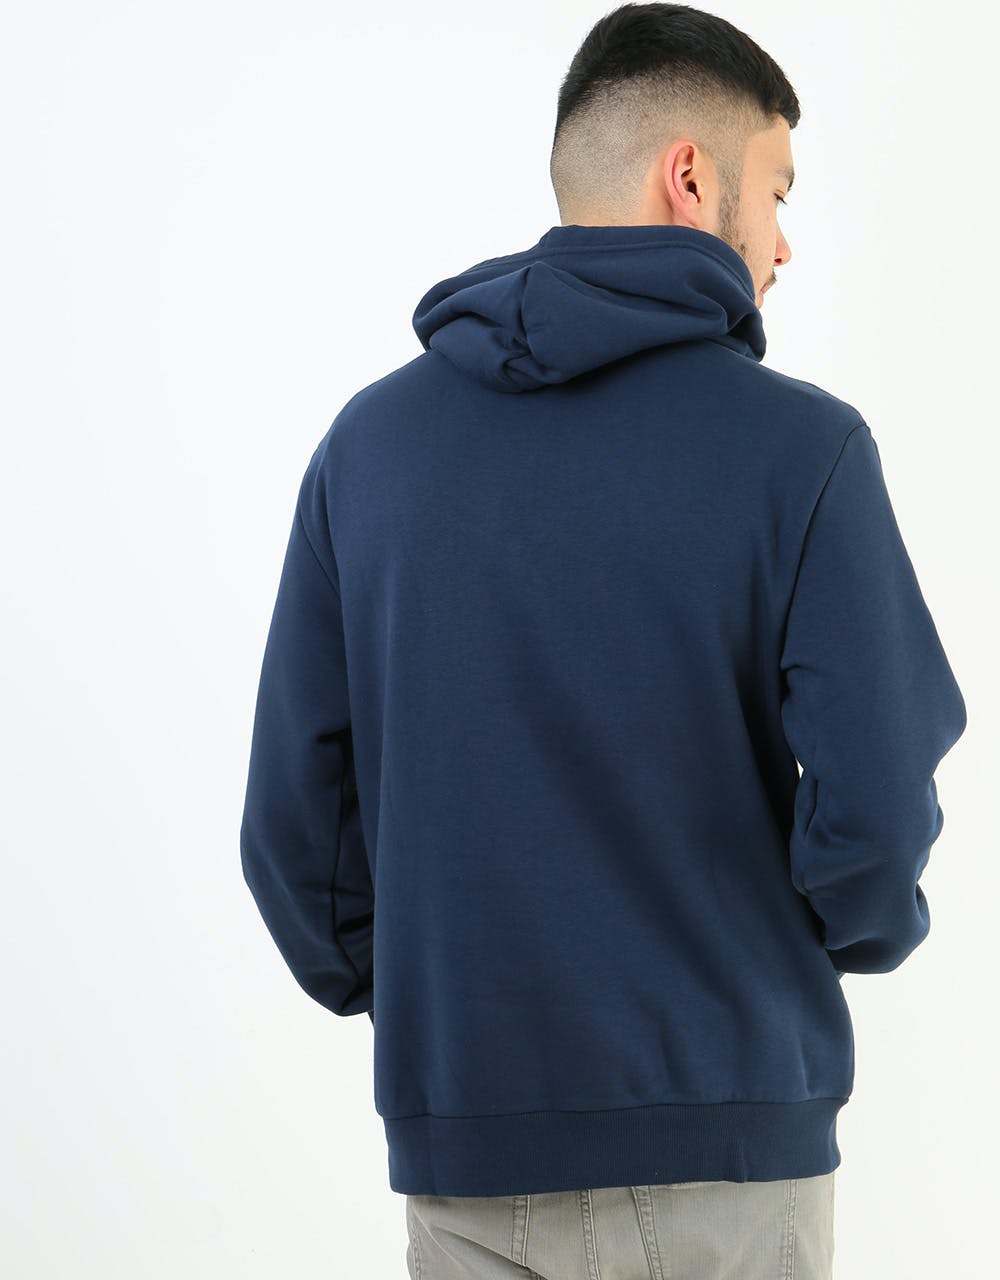 Converse Star Chevron Embroidered Pullover Hoodie - Obsidian